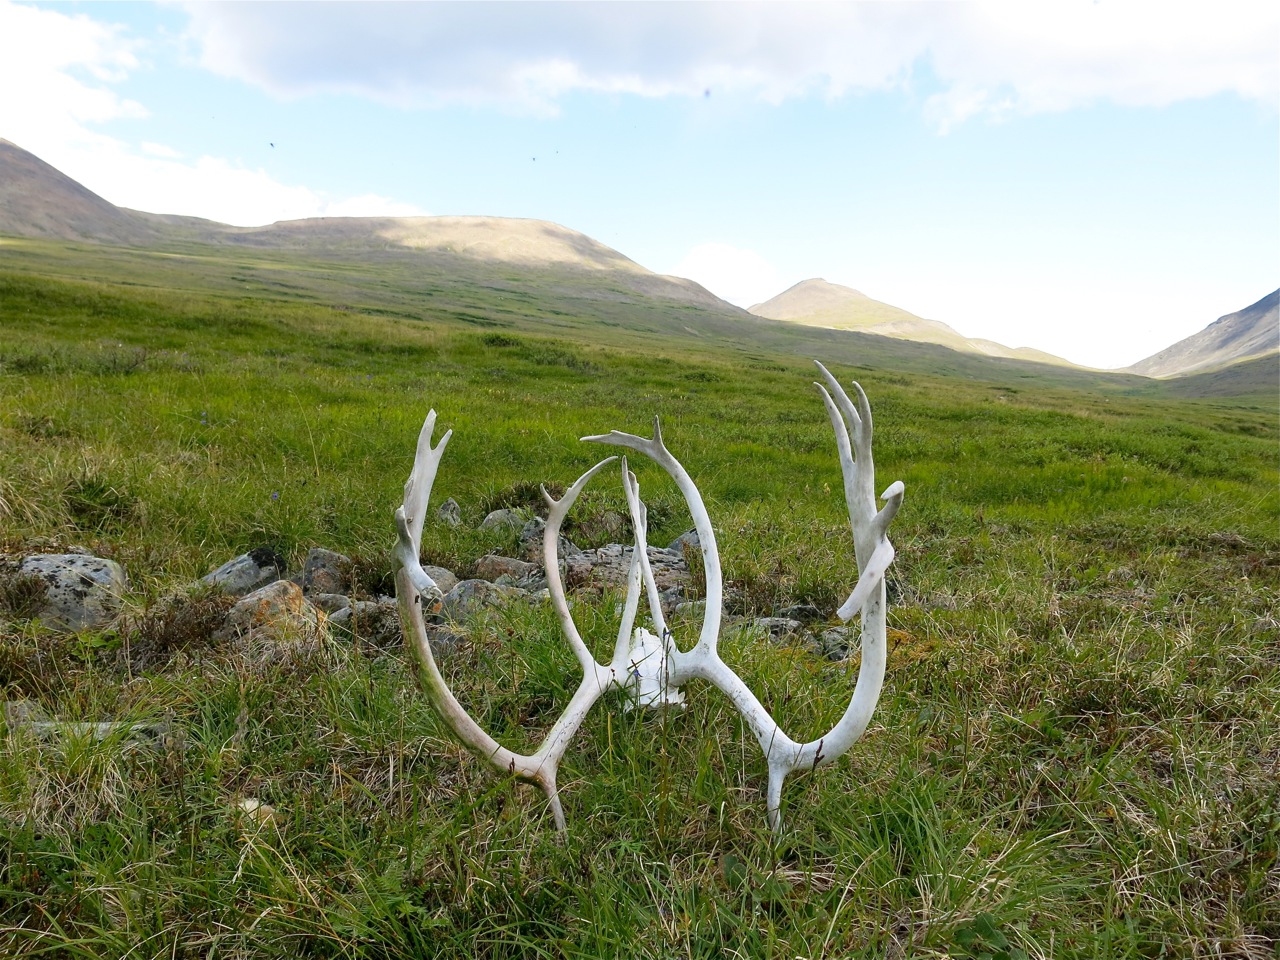 TangleAntlers